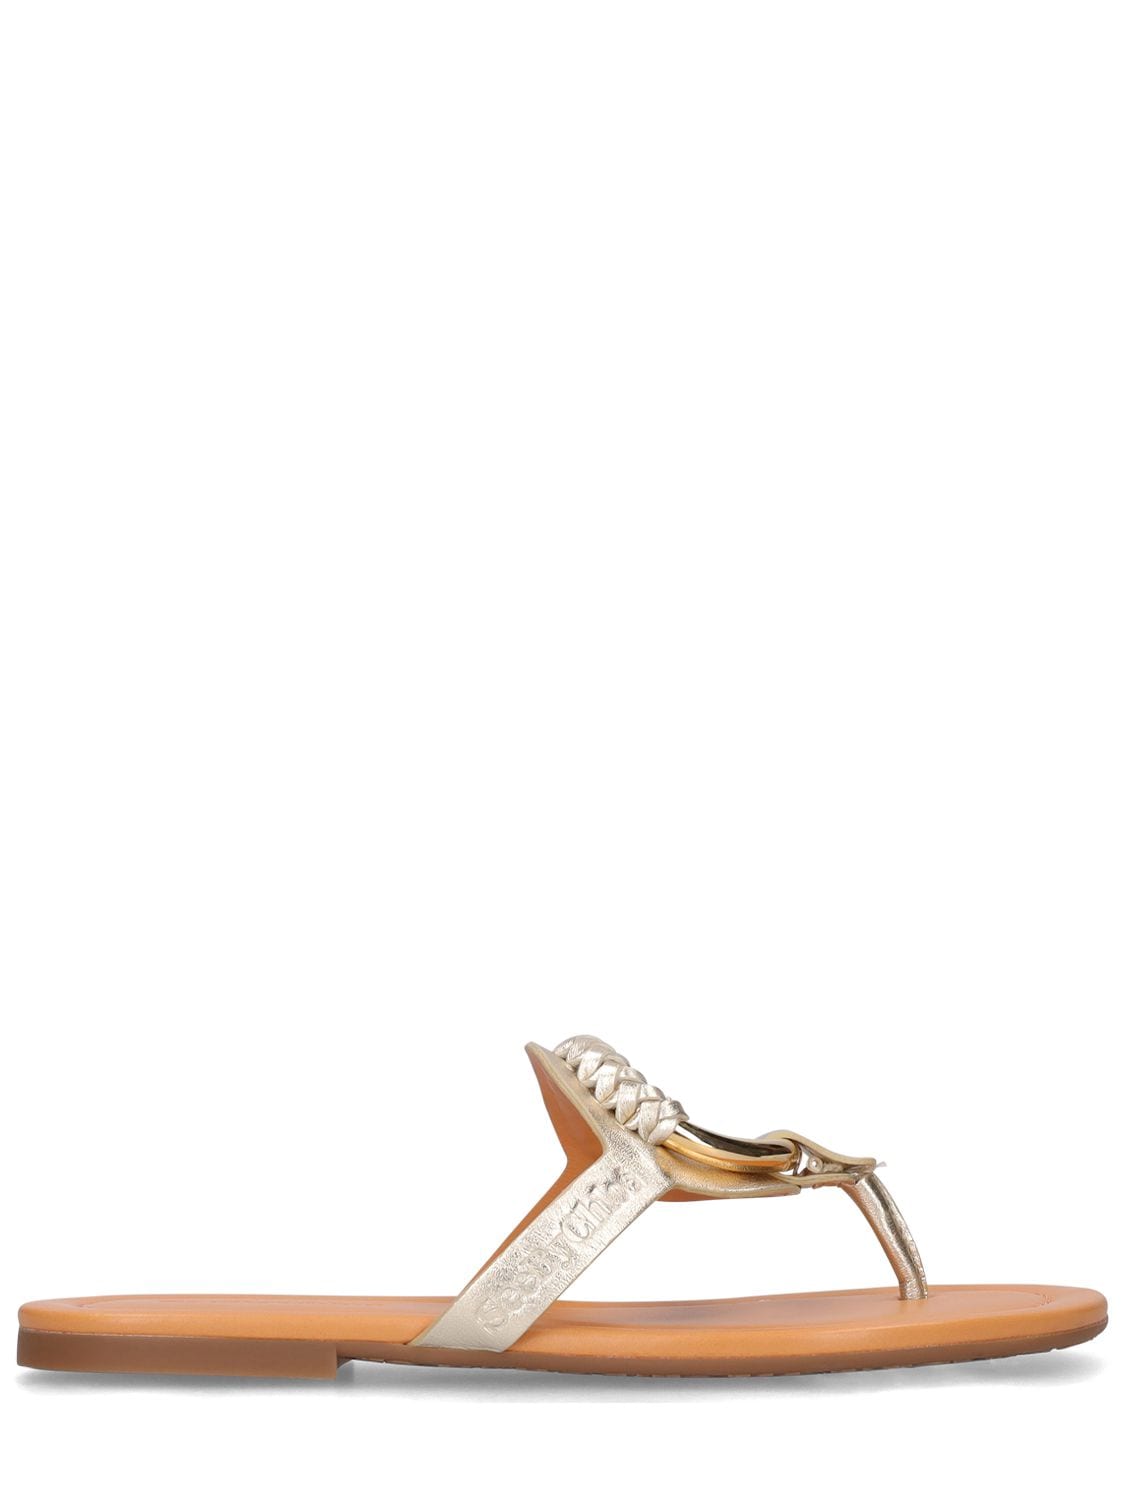 See By Chloé 10mm Hana Leather Sandals In Light Gold